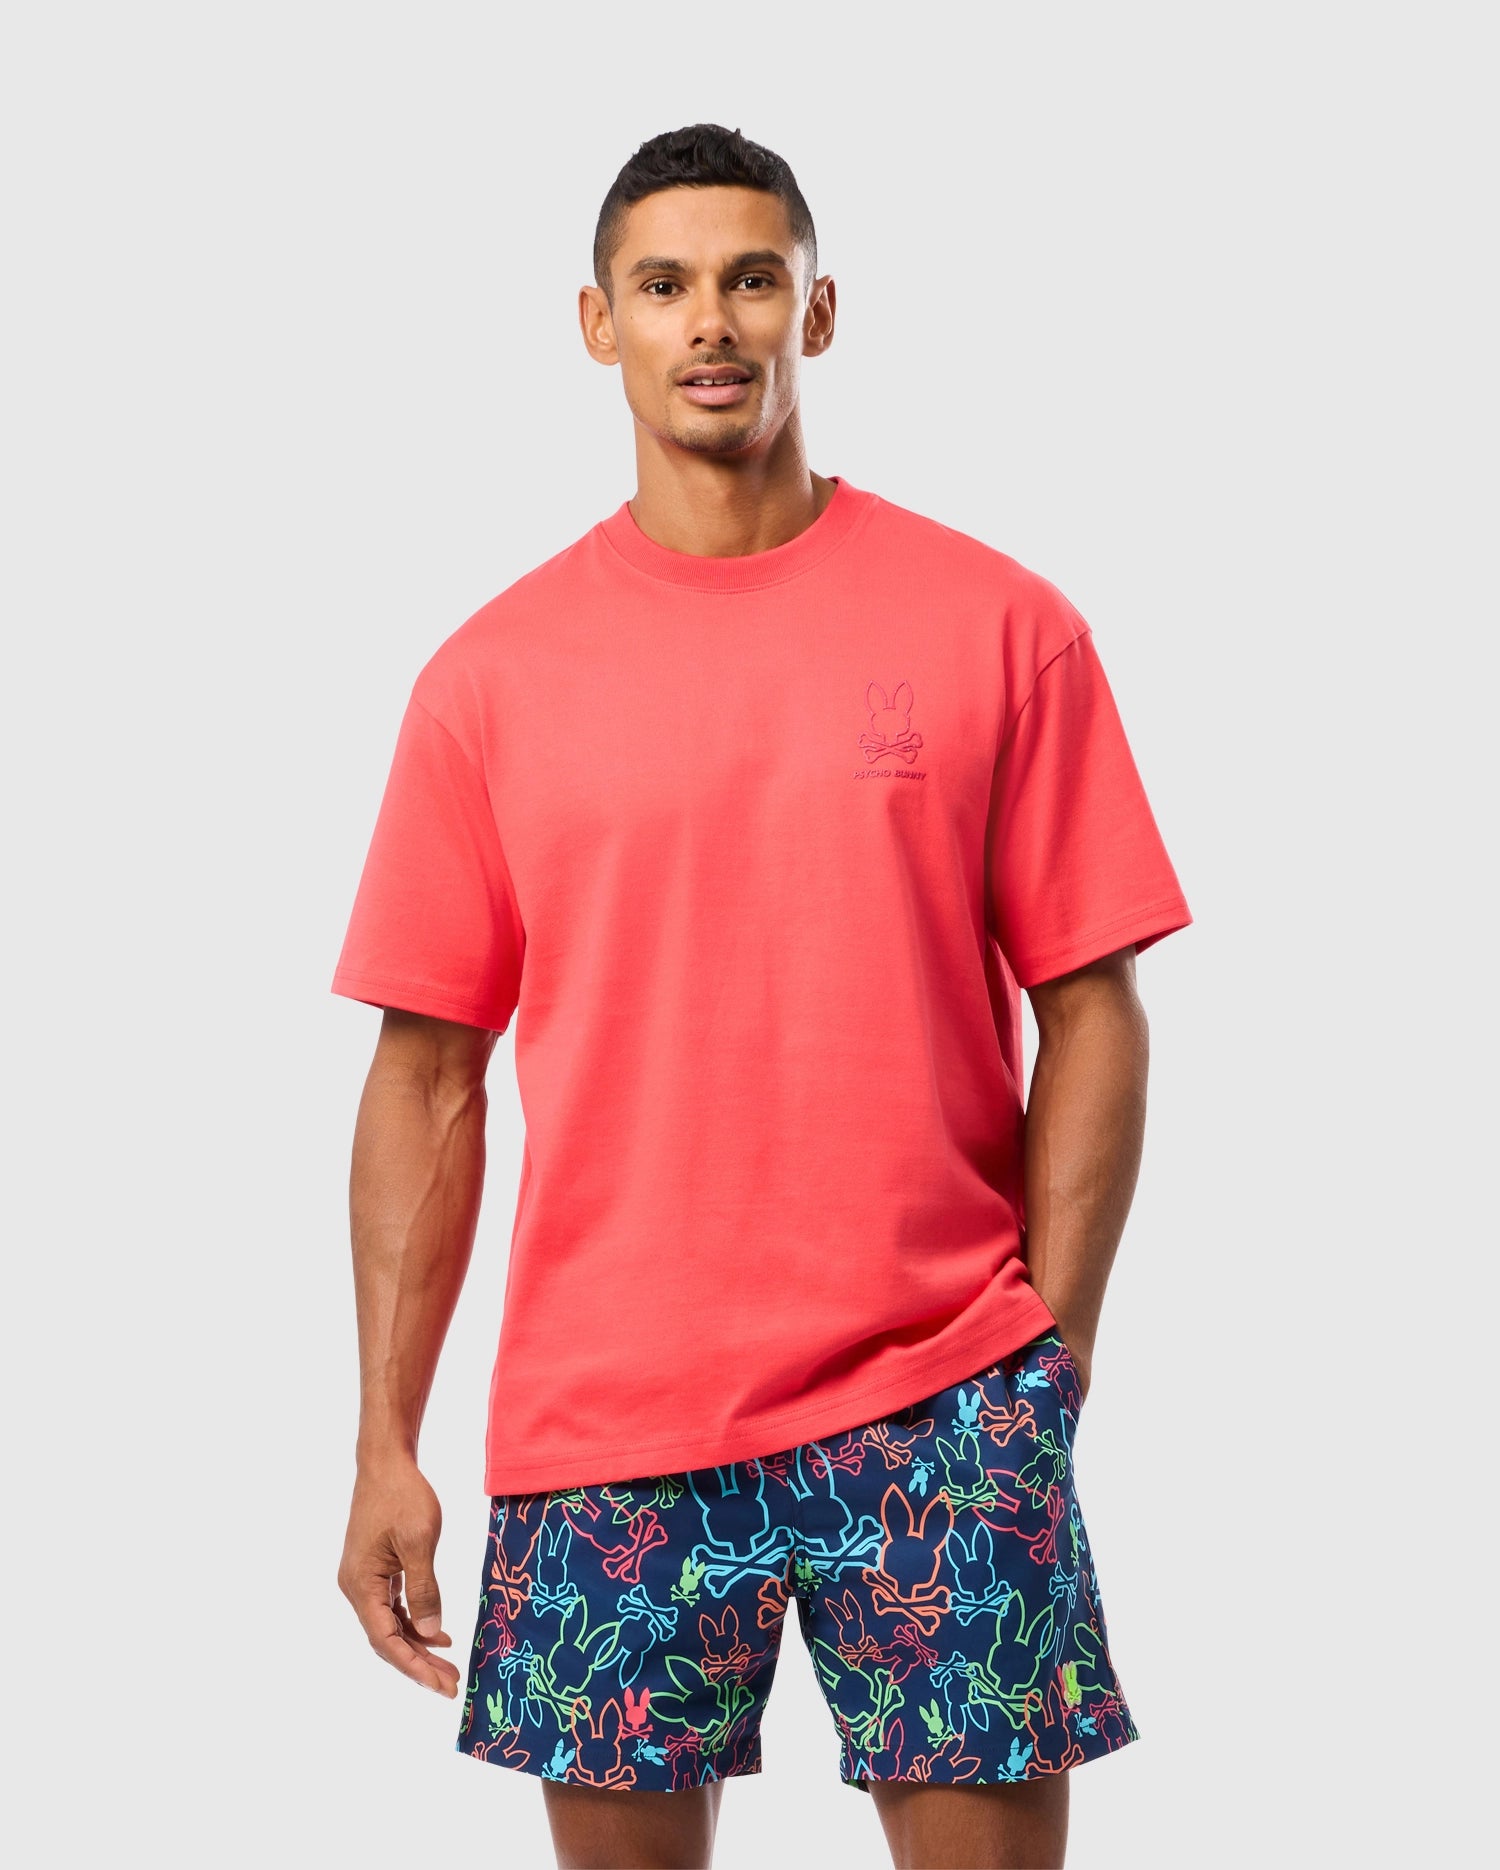 A man stands against a plain background wearing a bright red T-shirt in relaxed fit and colorful shorts with neon animal patterns. He has short dark hair and a neutral expression. The Psycho Bunny MENS BARRETT RELAXED FIT TEE - B6U518C200 features a small embroidered bunny graphic on the left chest area.